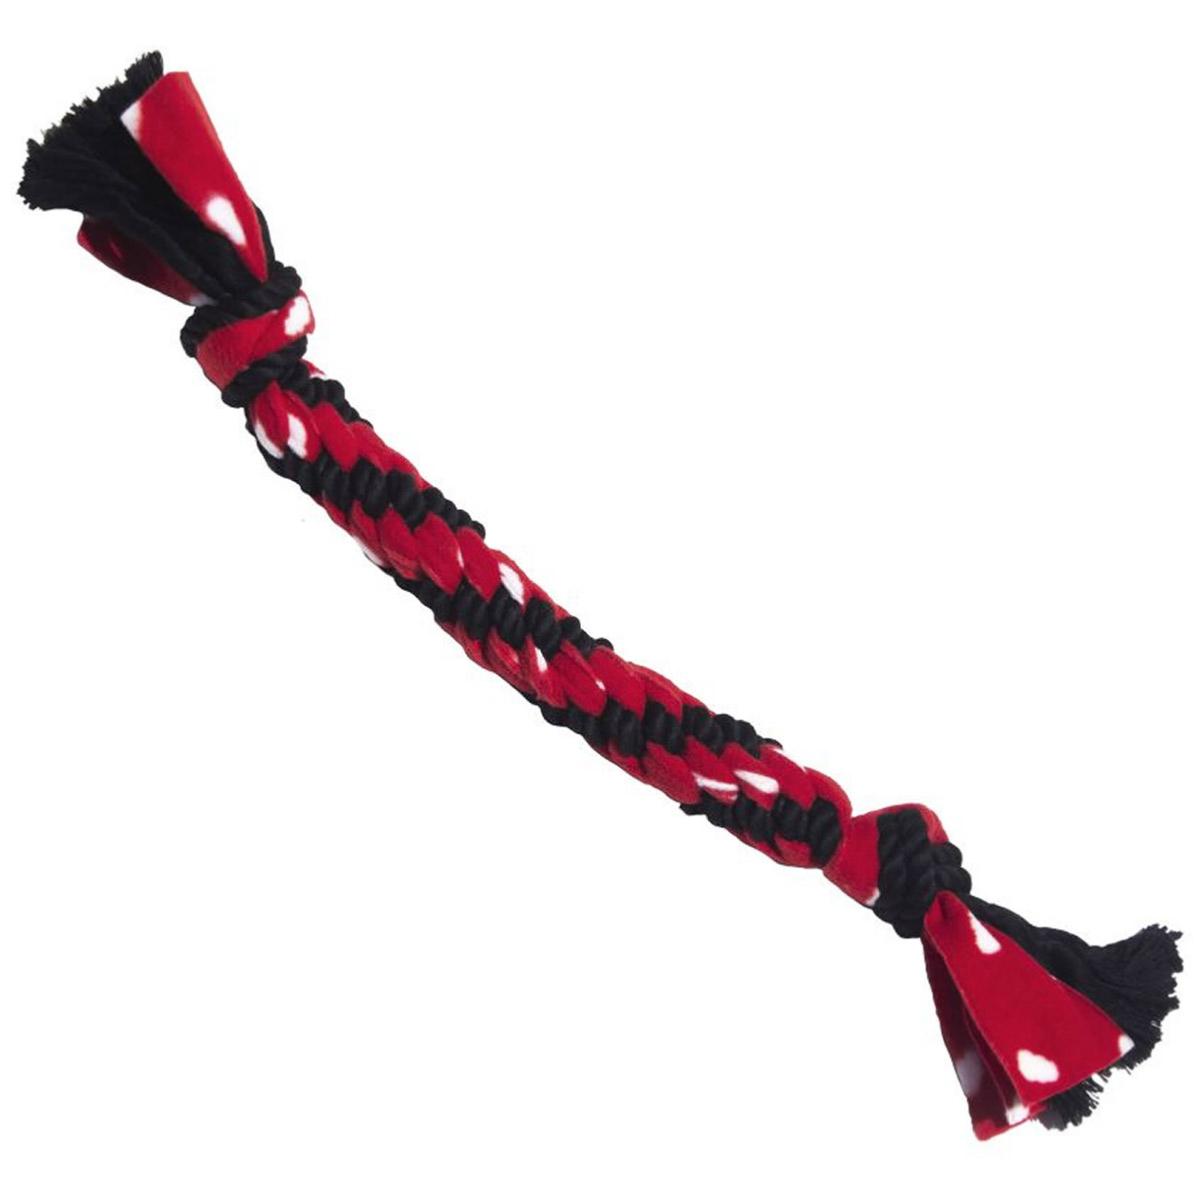 KONG Signature Rope 20" Dual Knot Dog Toy